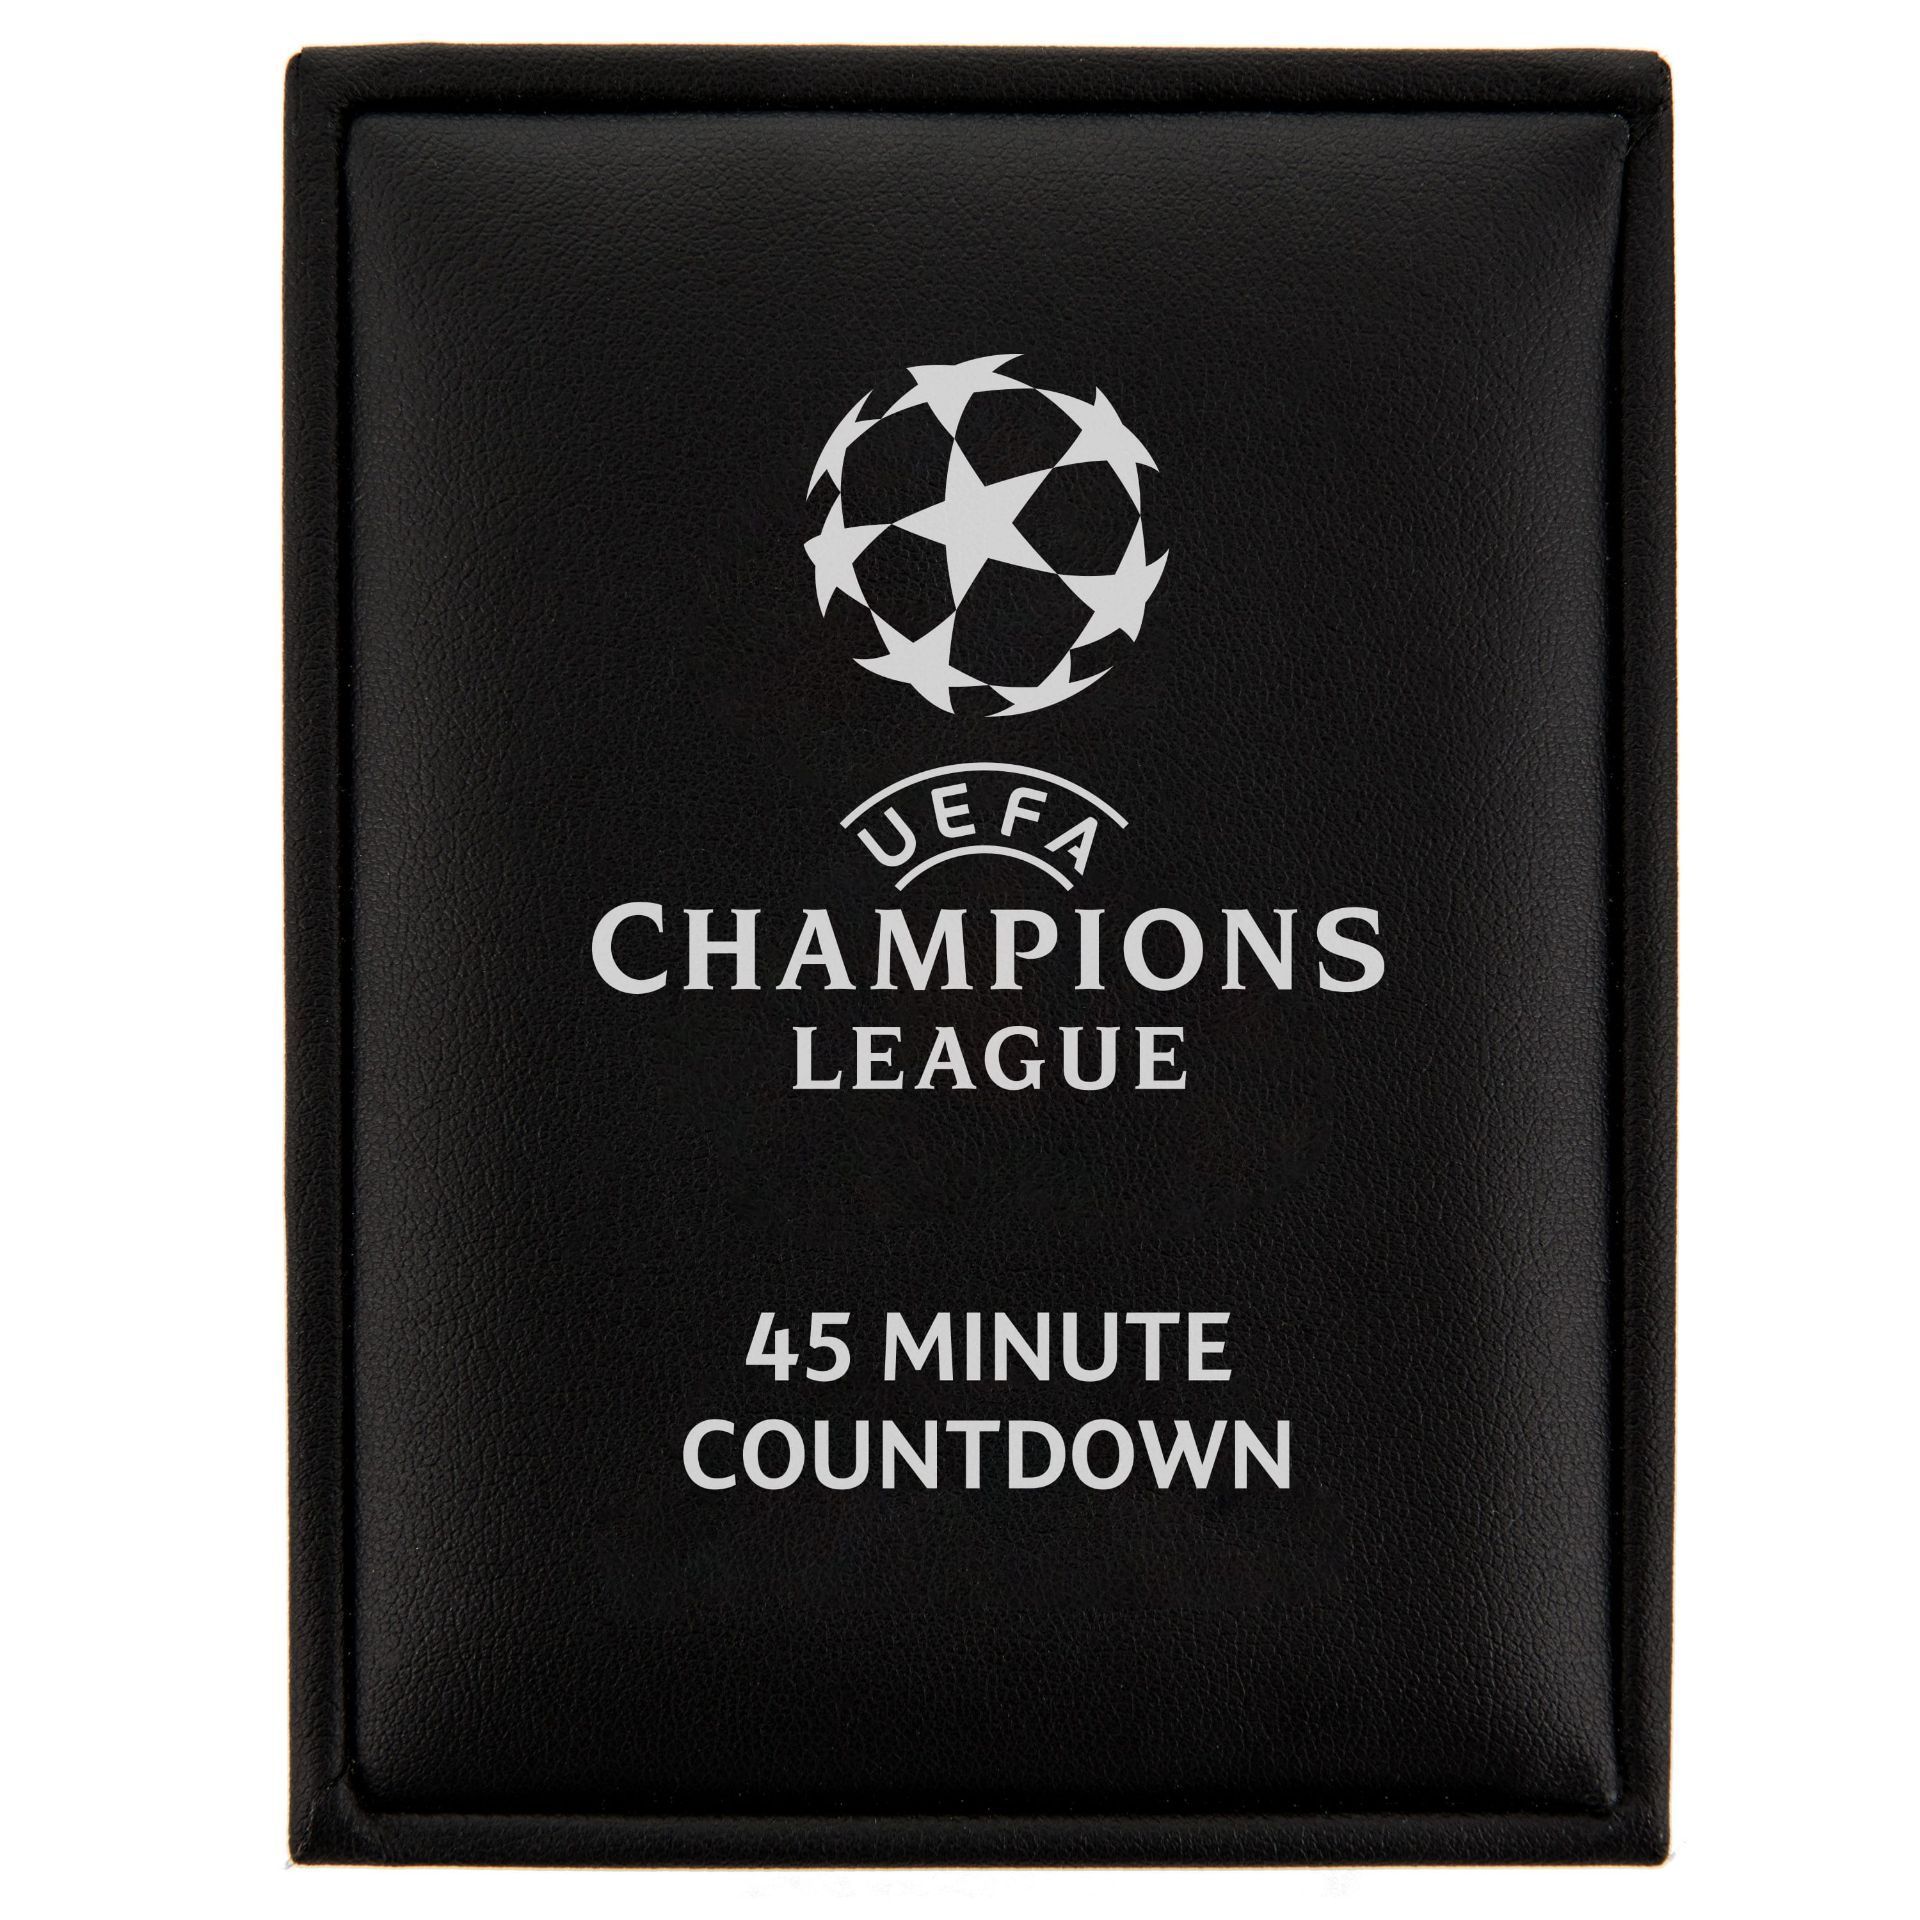 BULK LOT OF 29 x BRAND NEW OFFICIAL UEFA CHAMPIONS LEAGUE 45 MINUTES COUNTDOWN WATCH CL45-STB-BLGRP - Image 5 of 5